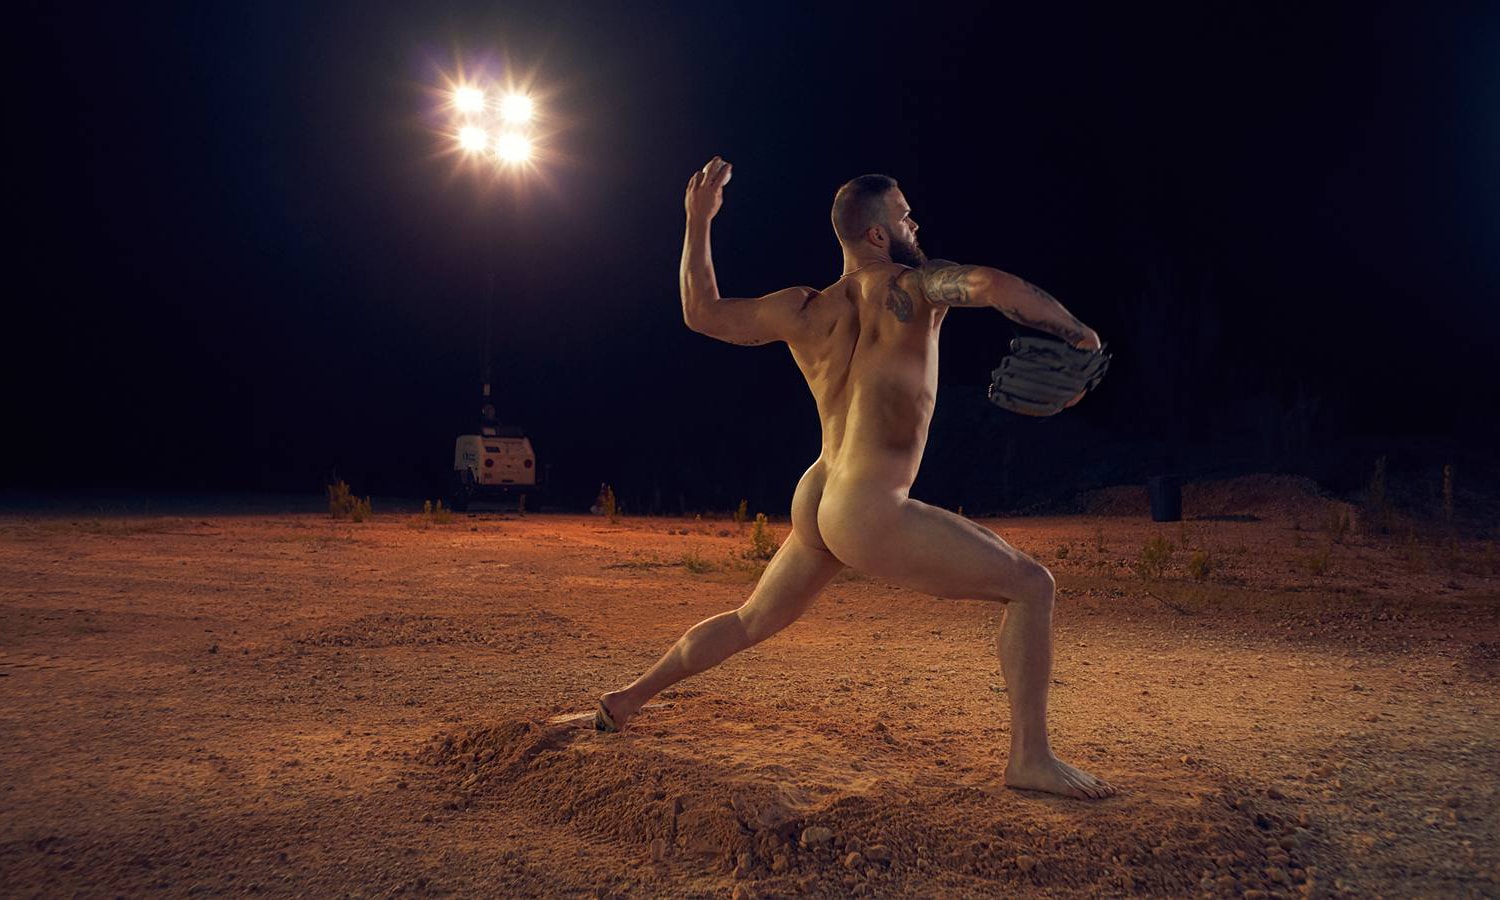 ESPN「The Body Issue」運動員寫真發佈